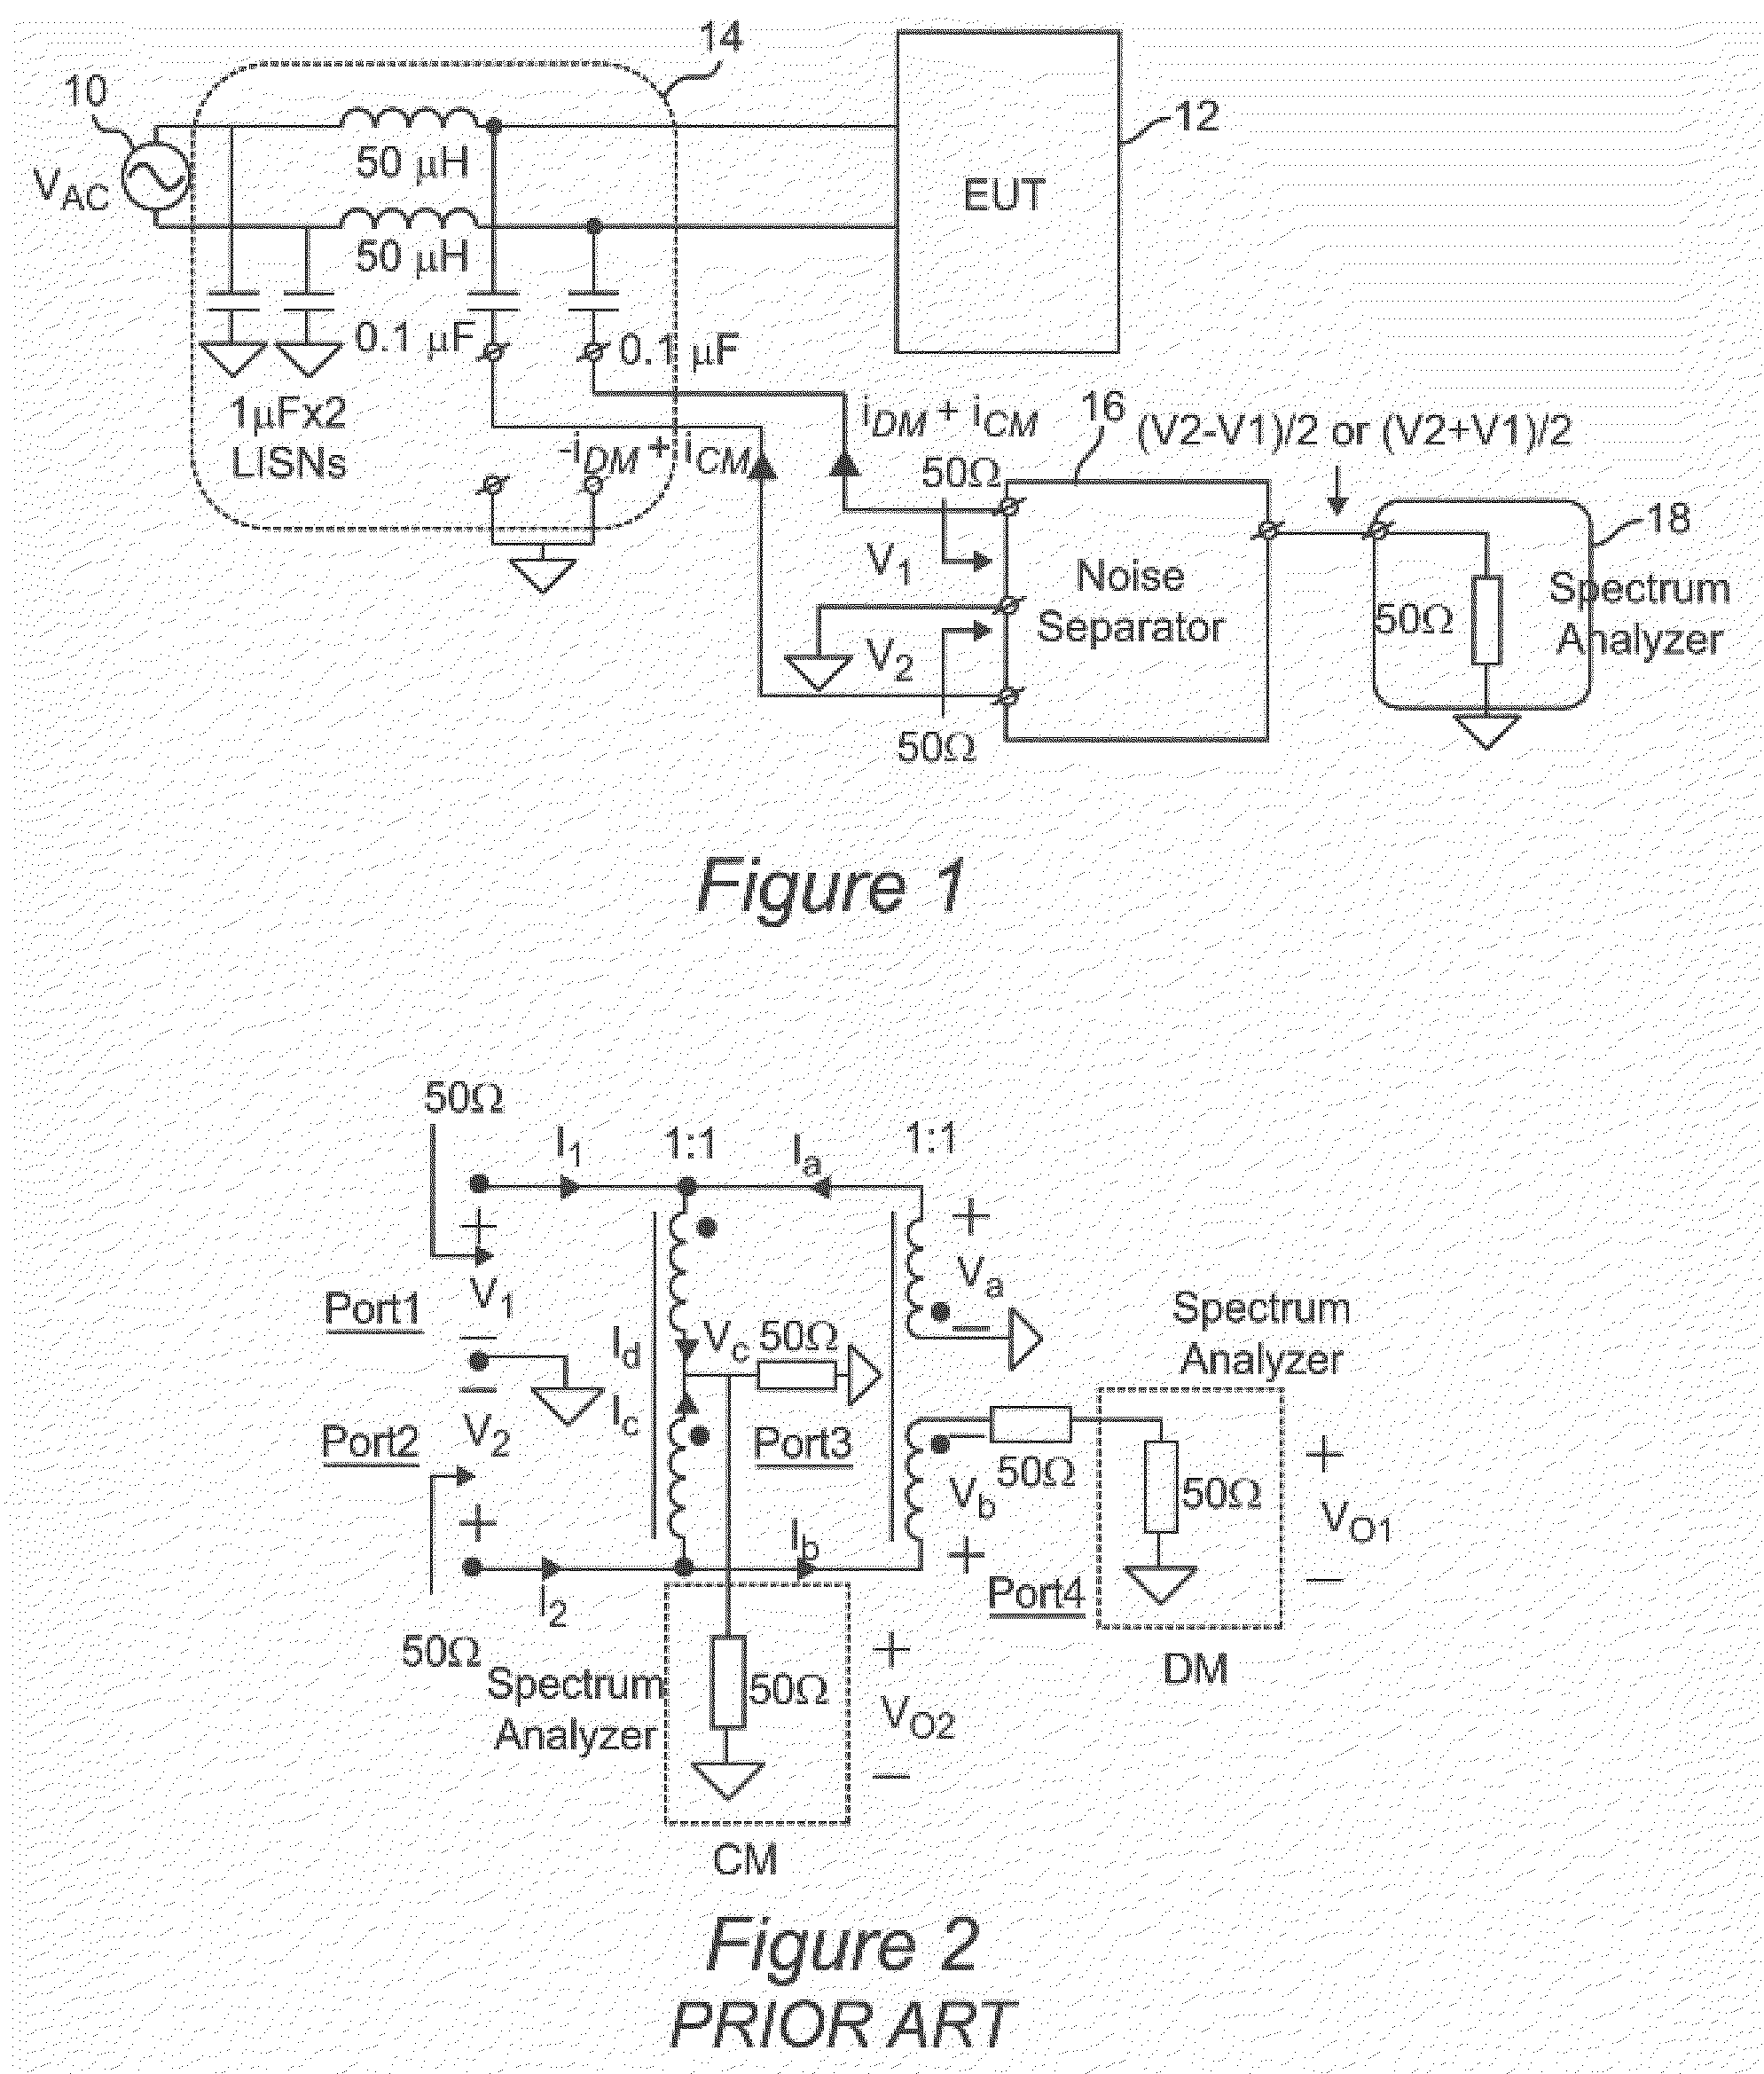 Electromagnetic Interference Noise Separator